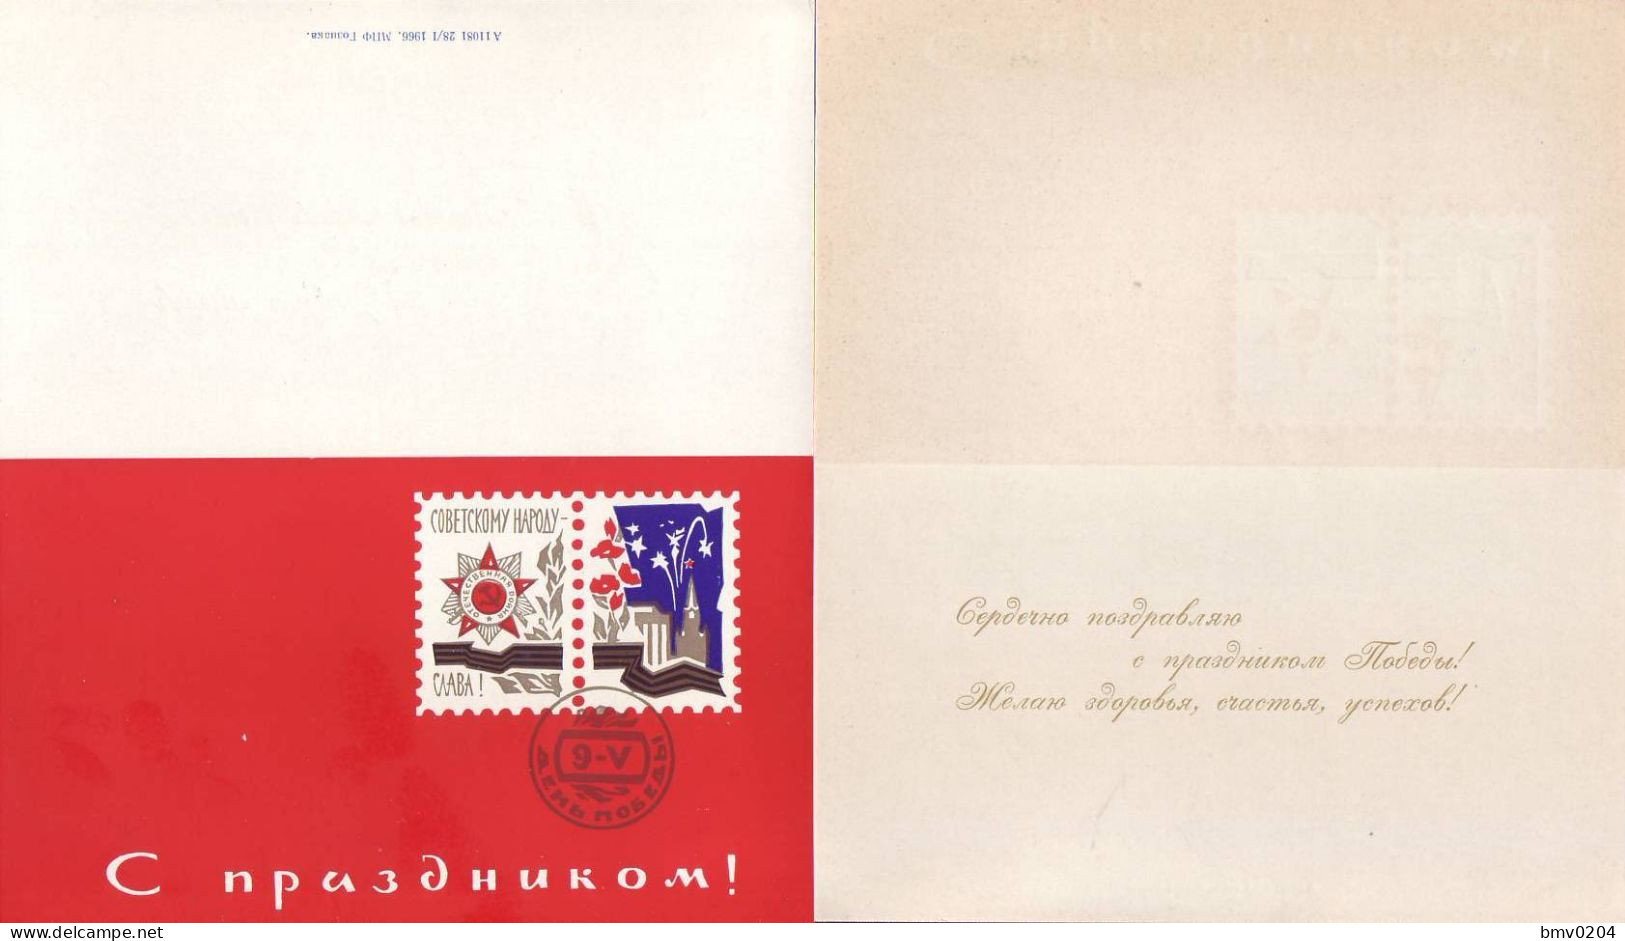 1966 RUSSIA RUSSIE USSR URSS  May 9 - Victory Day! Order, Victory Salute  Souvenir Postcard - Lettres & Documents